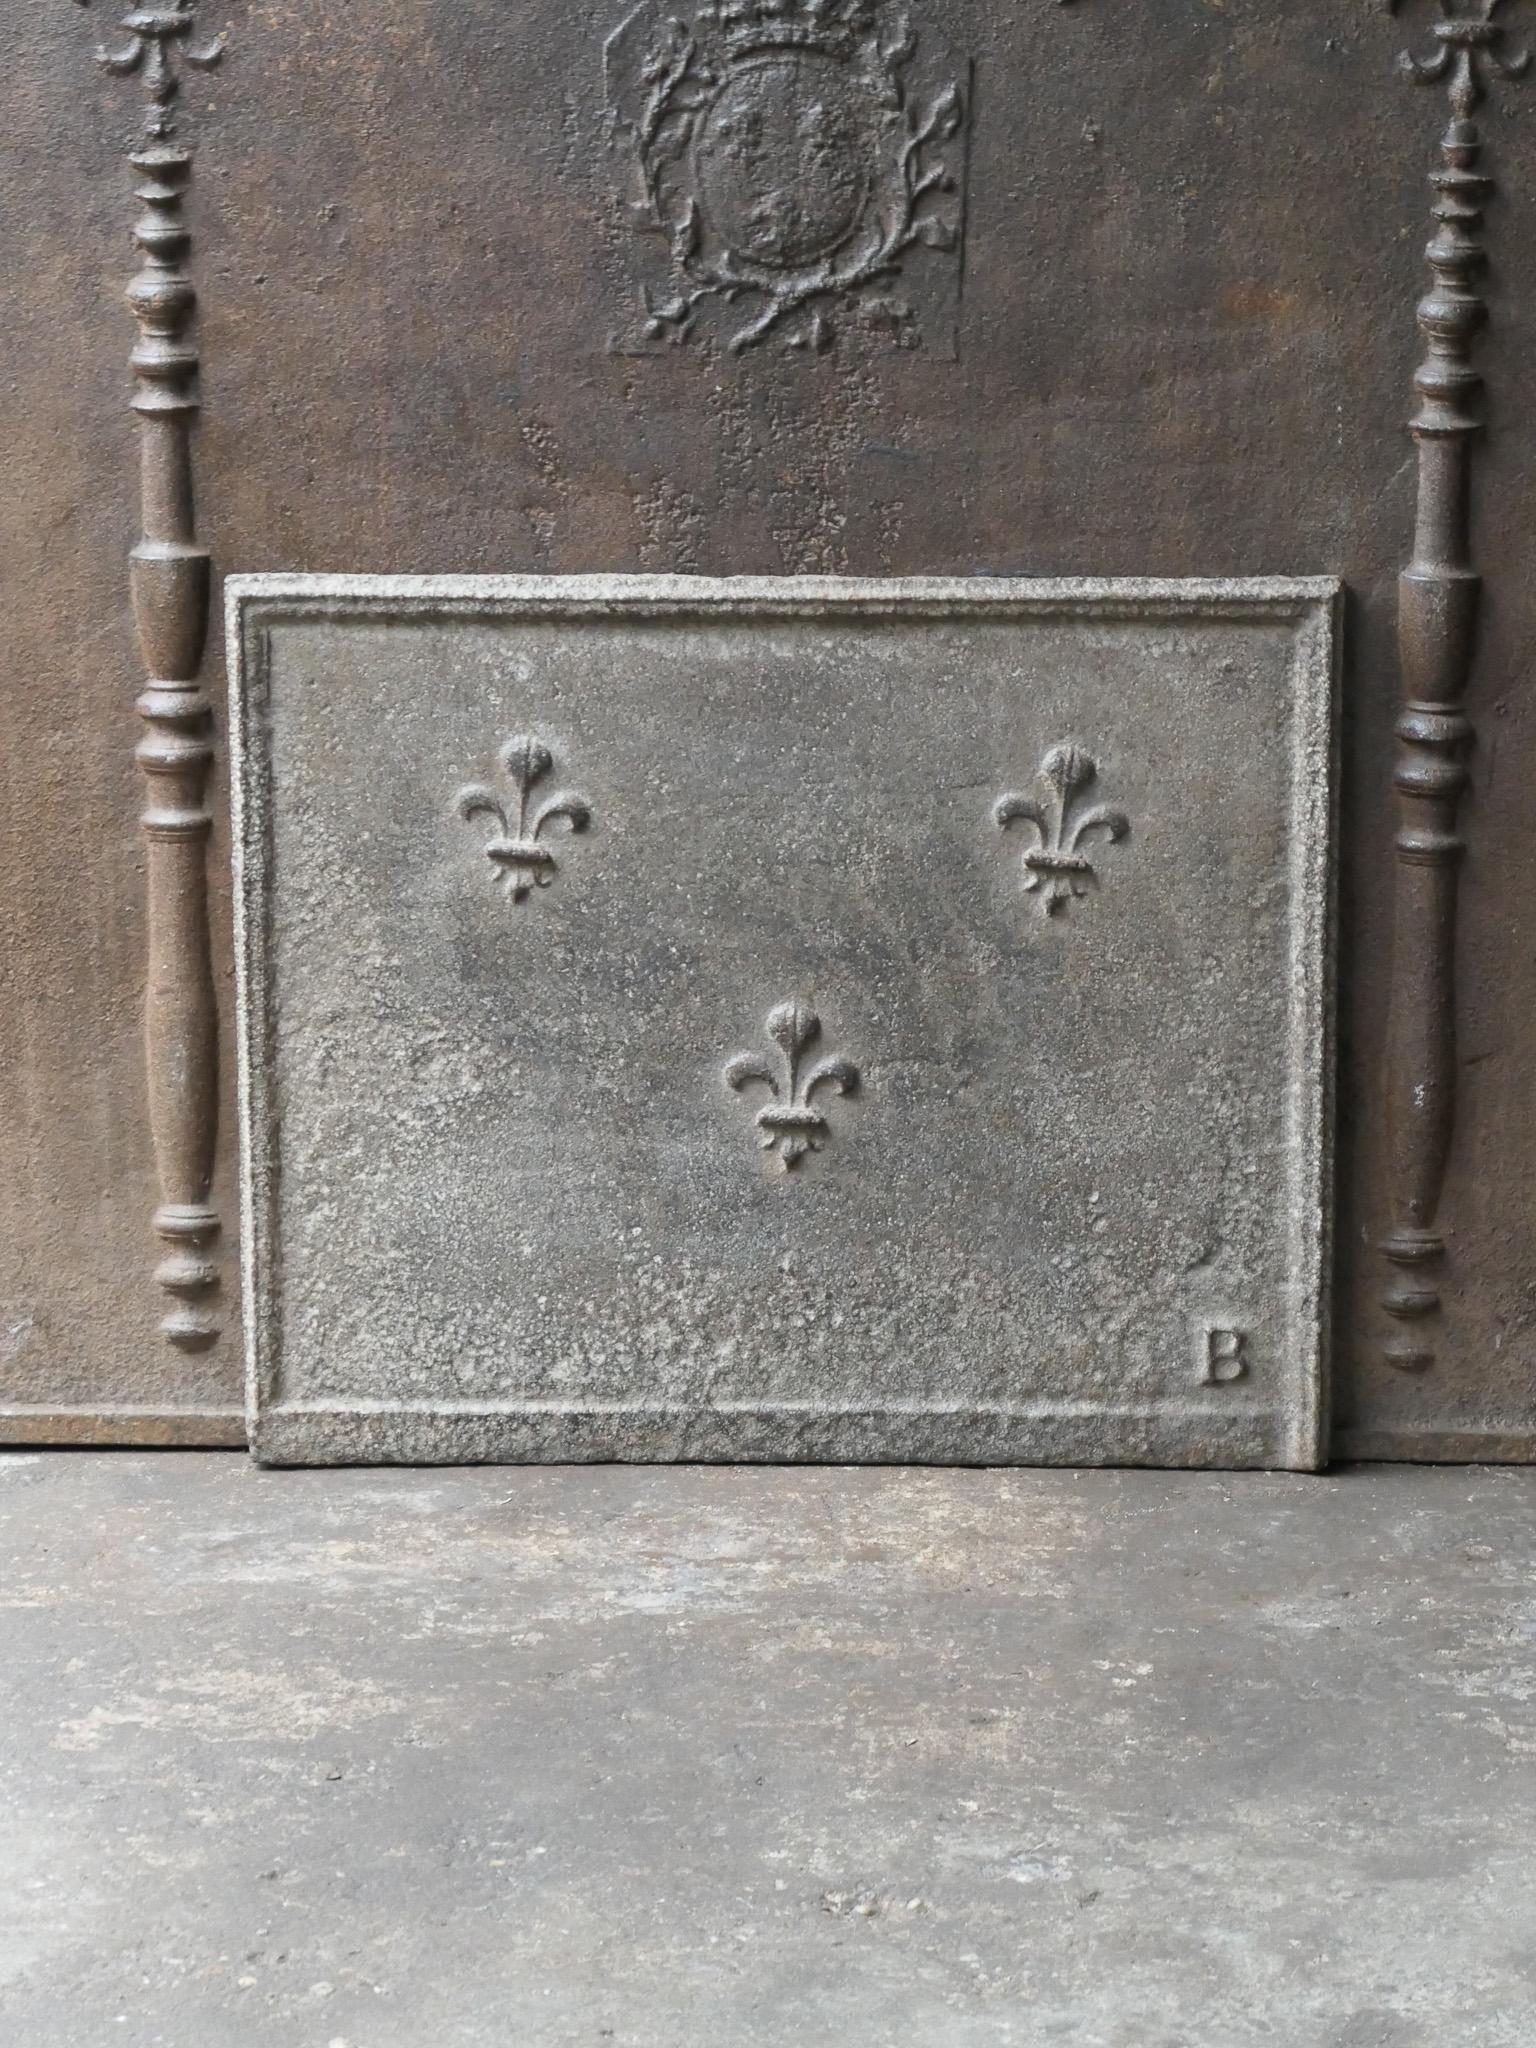 Beautiful 18th century French Louis XV fireback with three Fleurs de Lys. The Fleur de Lys (French Lily) symbolized royalty and aristocracy throughout Europe. The pillars stand for the club of Hercules and symbolize strength and the unknown. 

The